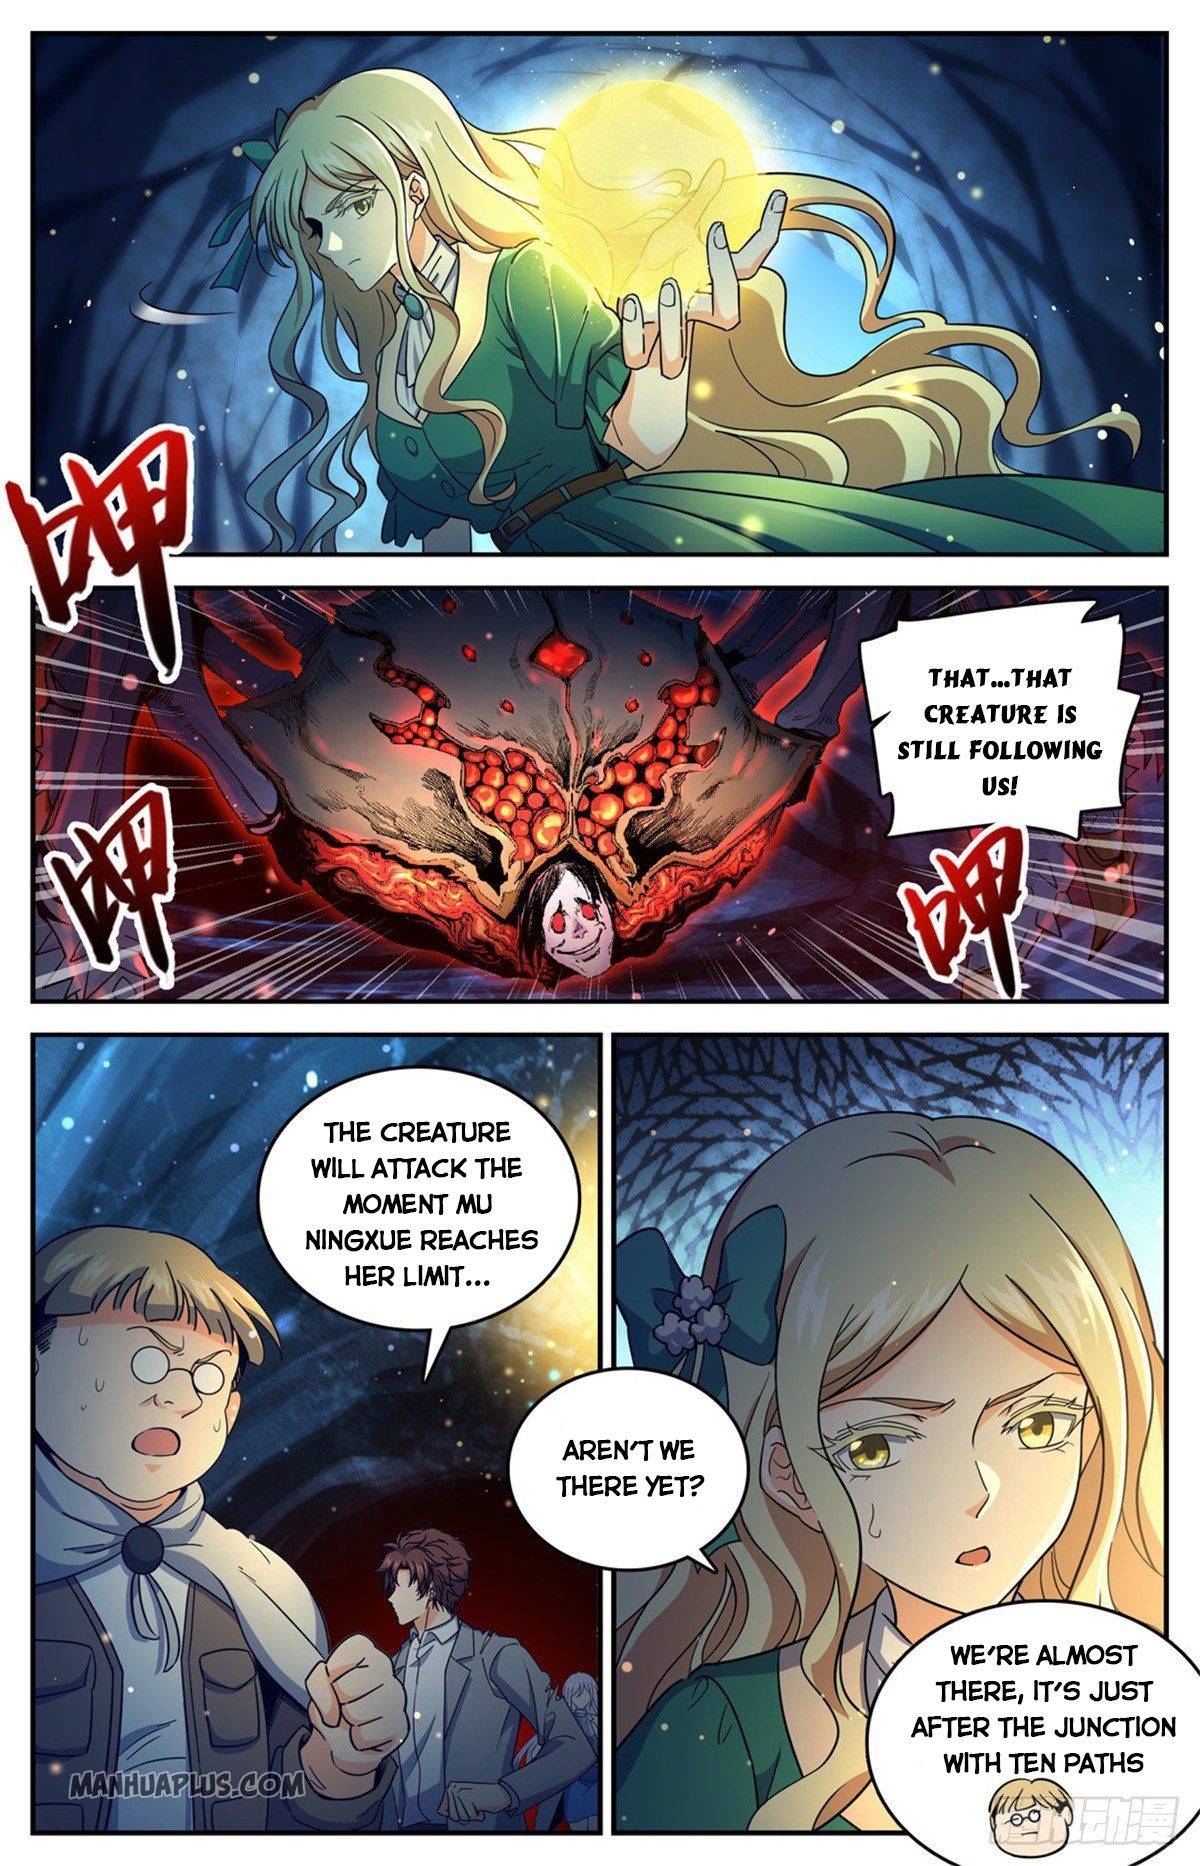 Versatile Mage chapter 715 page 3